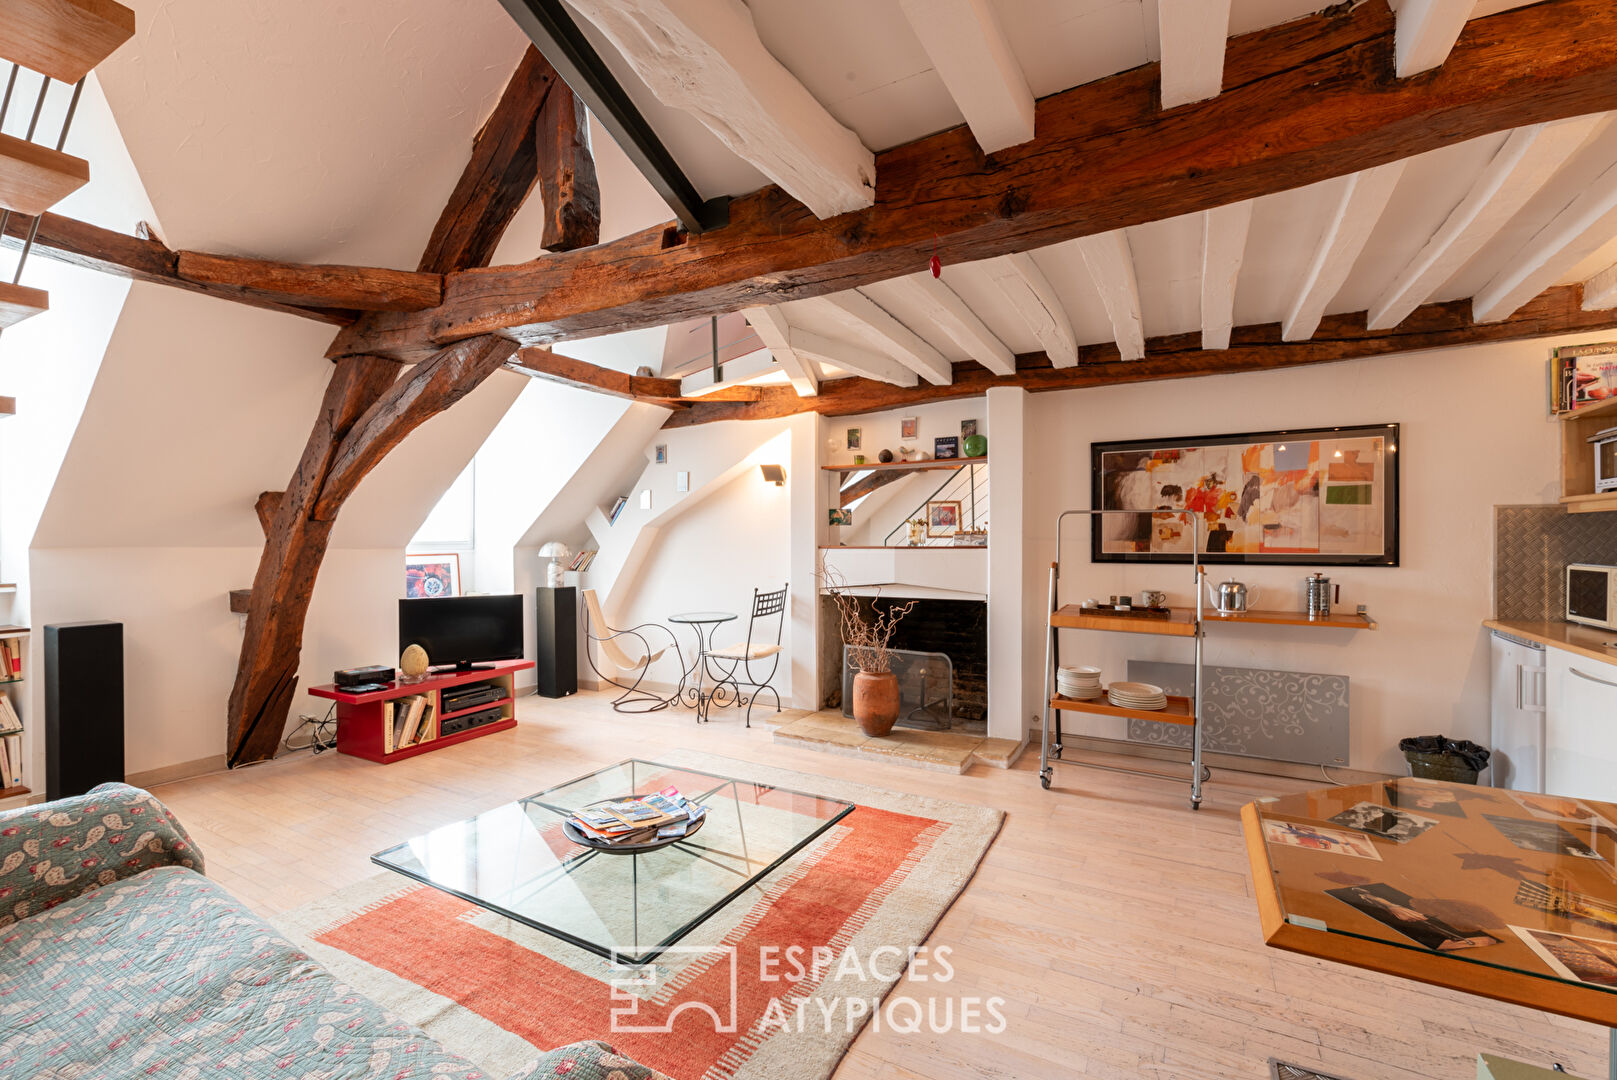 Fully furnished duplex apartment close to the Parliament of Rennes